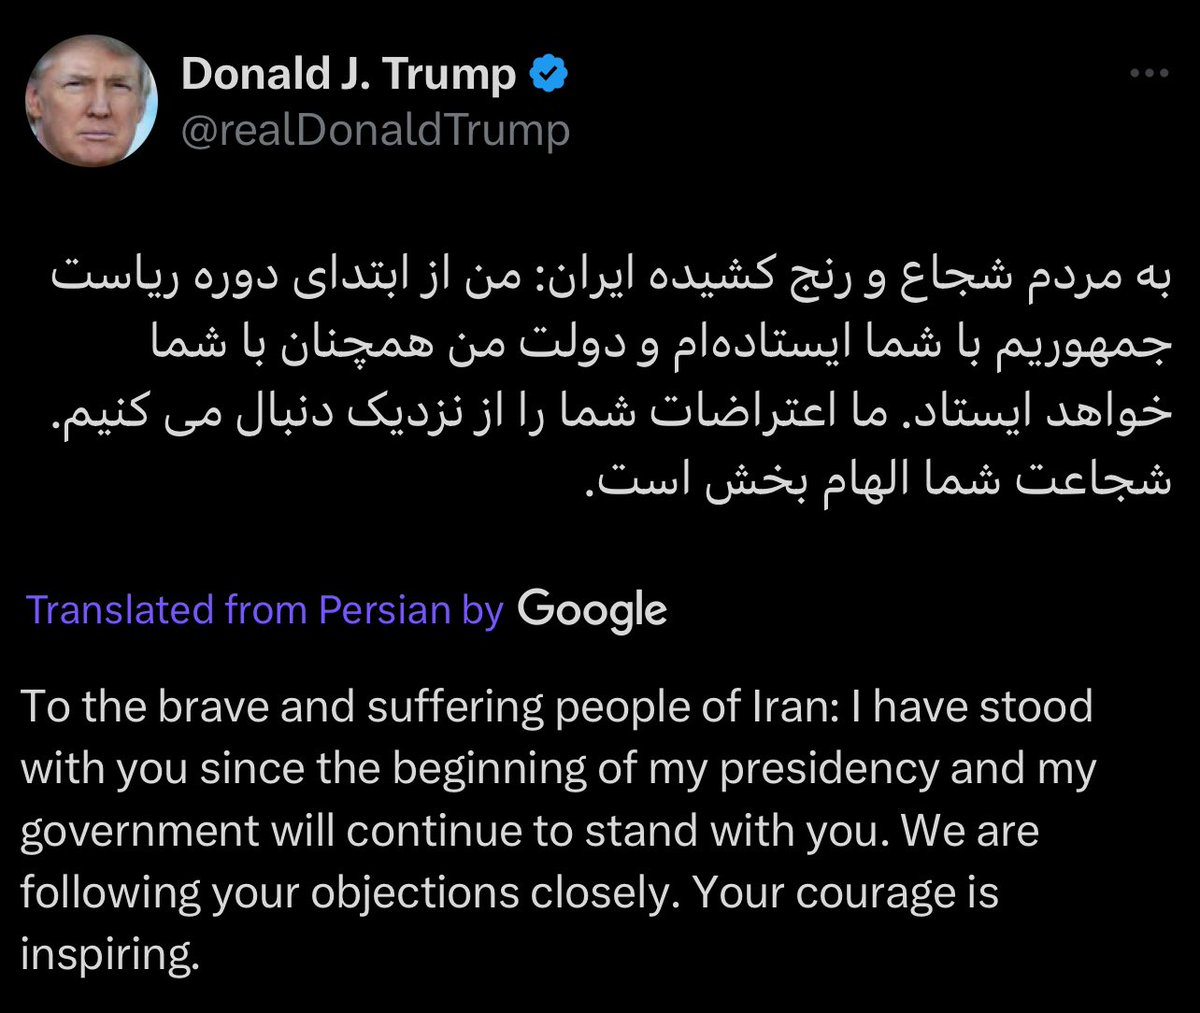 Iranians stand with President Trump.

The ONLY President who stood with us.